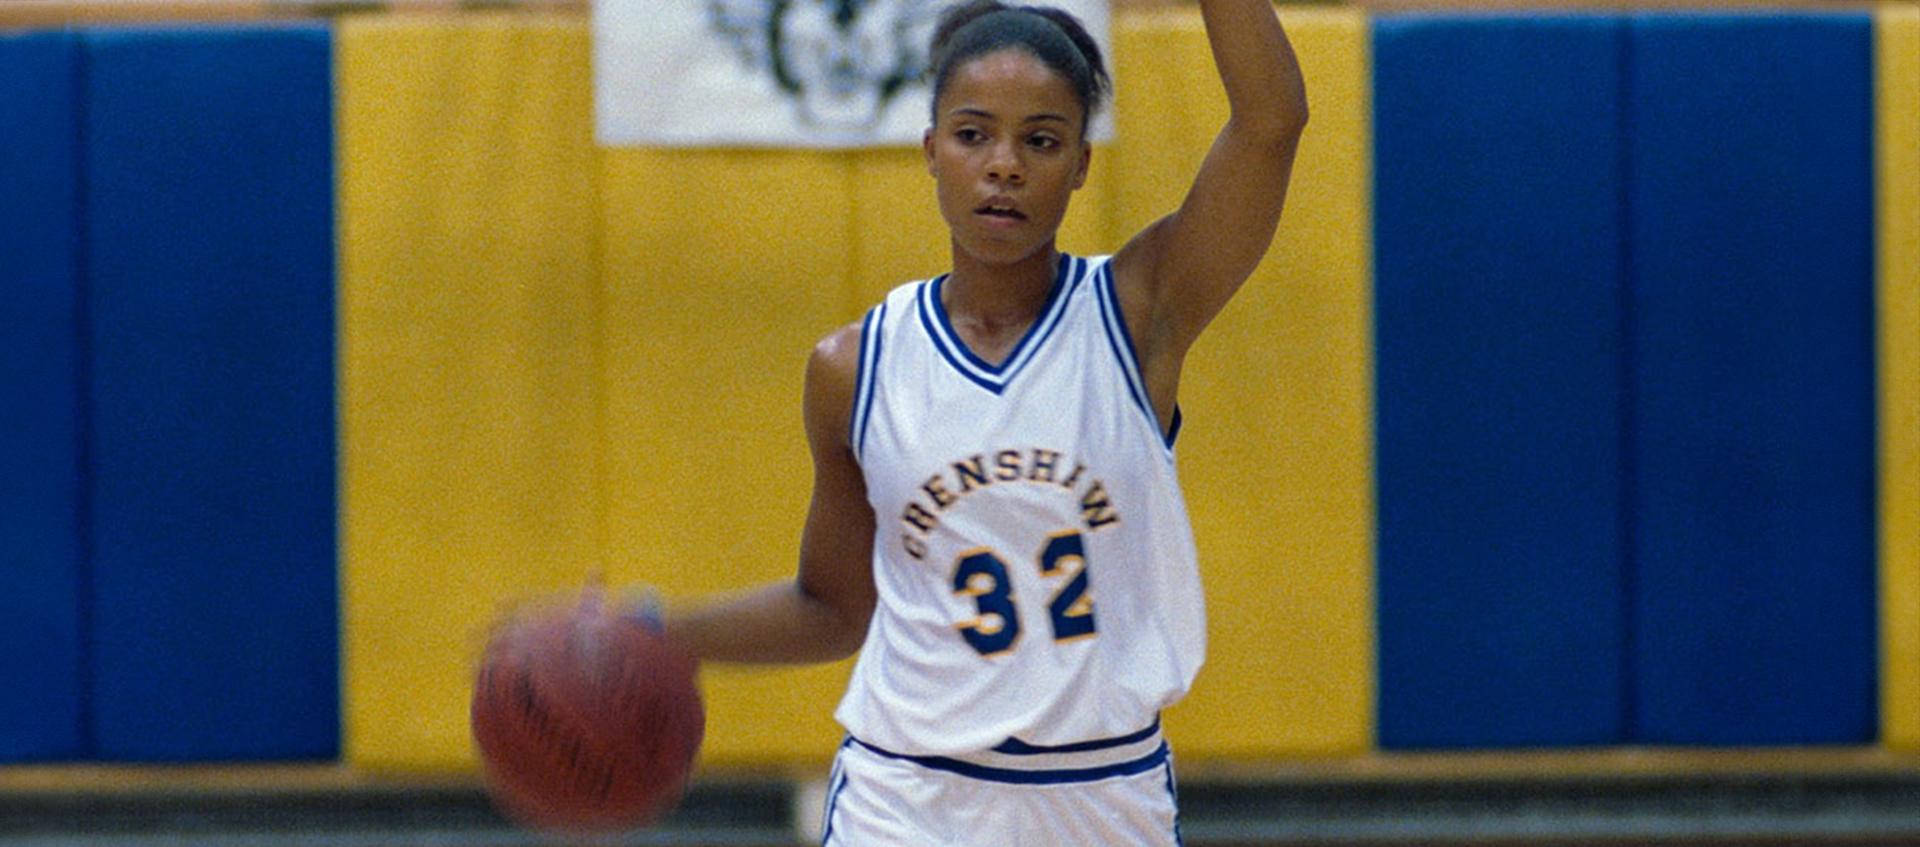 Still from Love & Basketball of a woman dribbling a basketball wearing a basketball uniform.